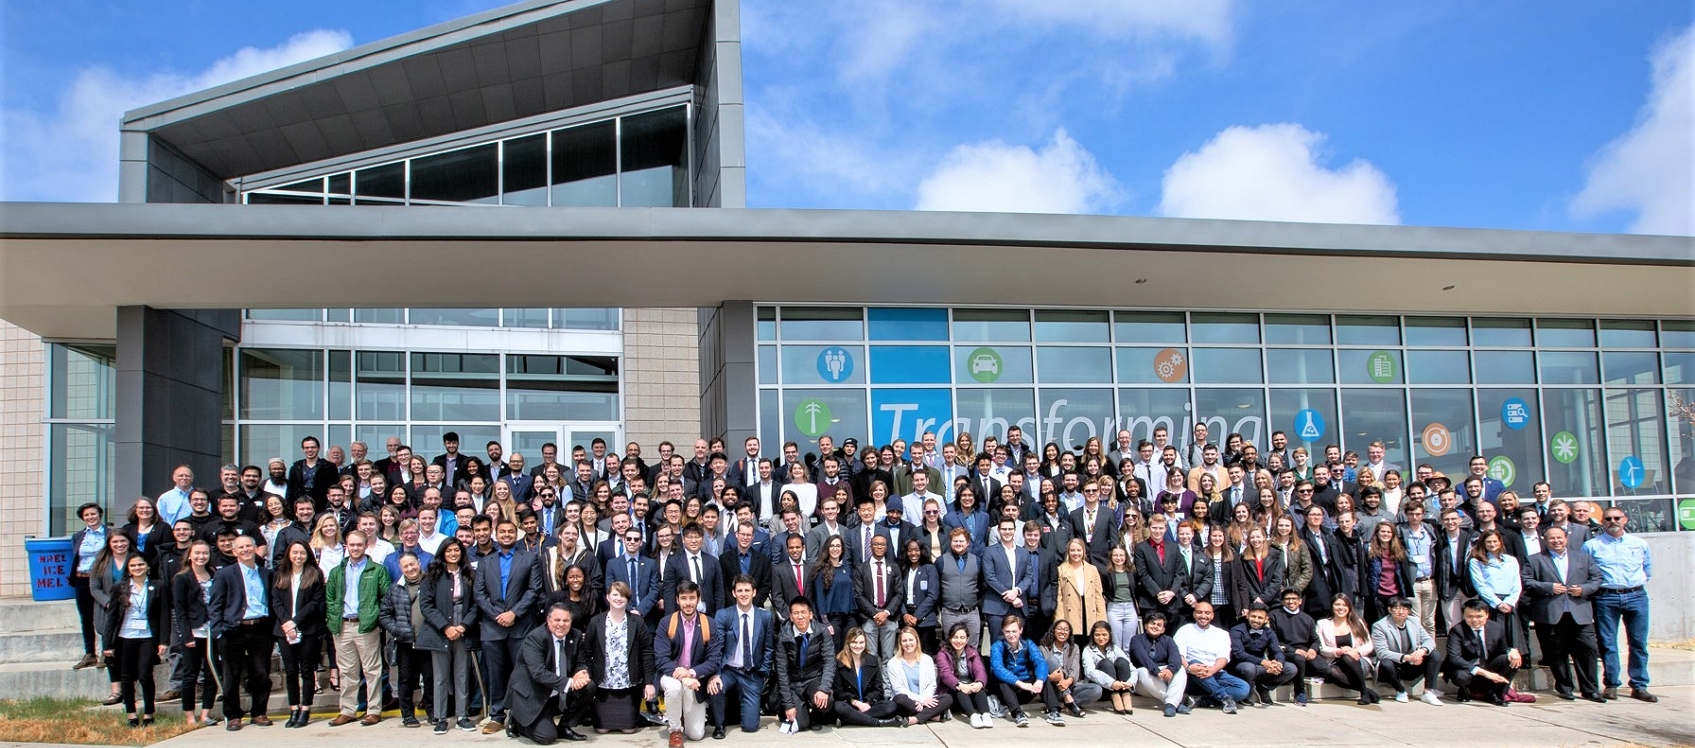 Photo of about 100 participants at the U.S. Department of Energy Solar Decathlon.